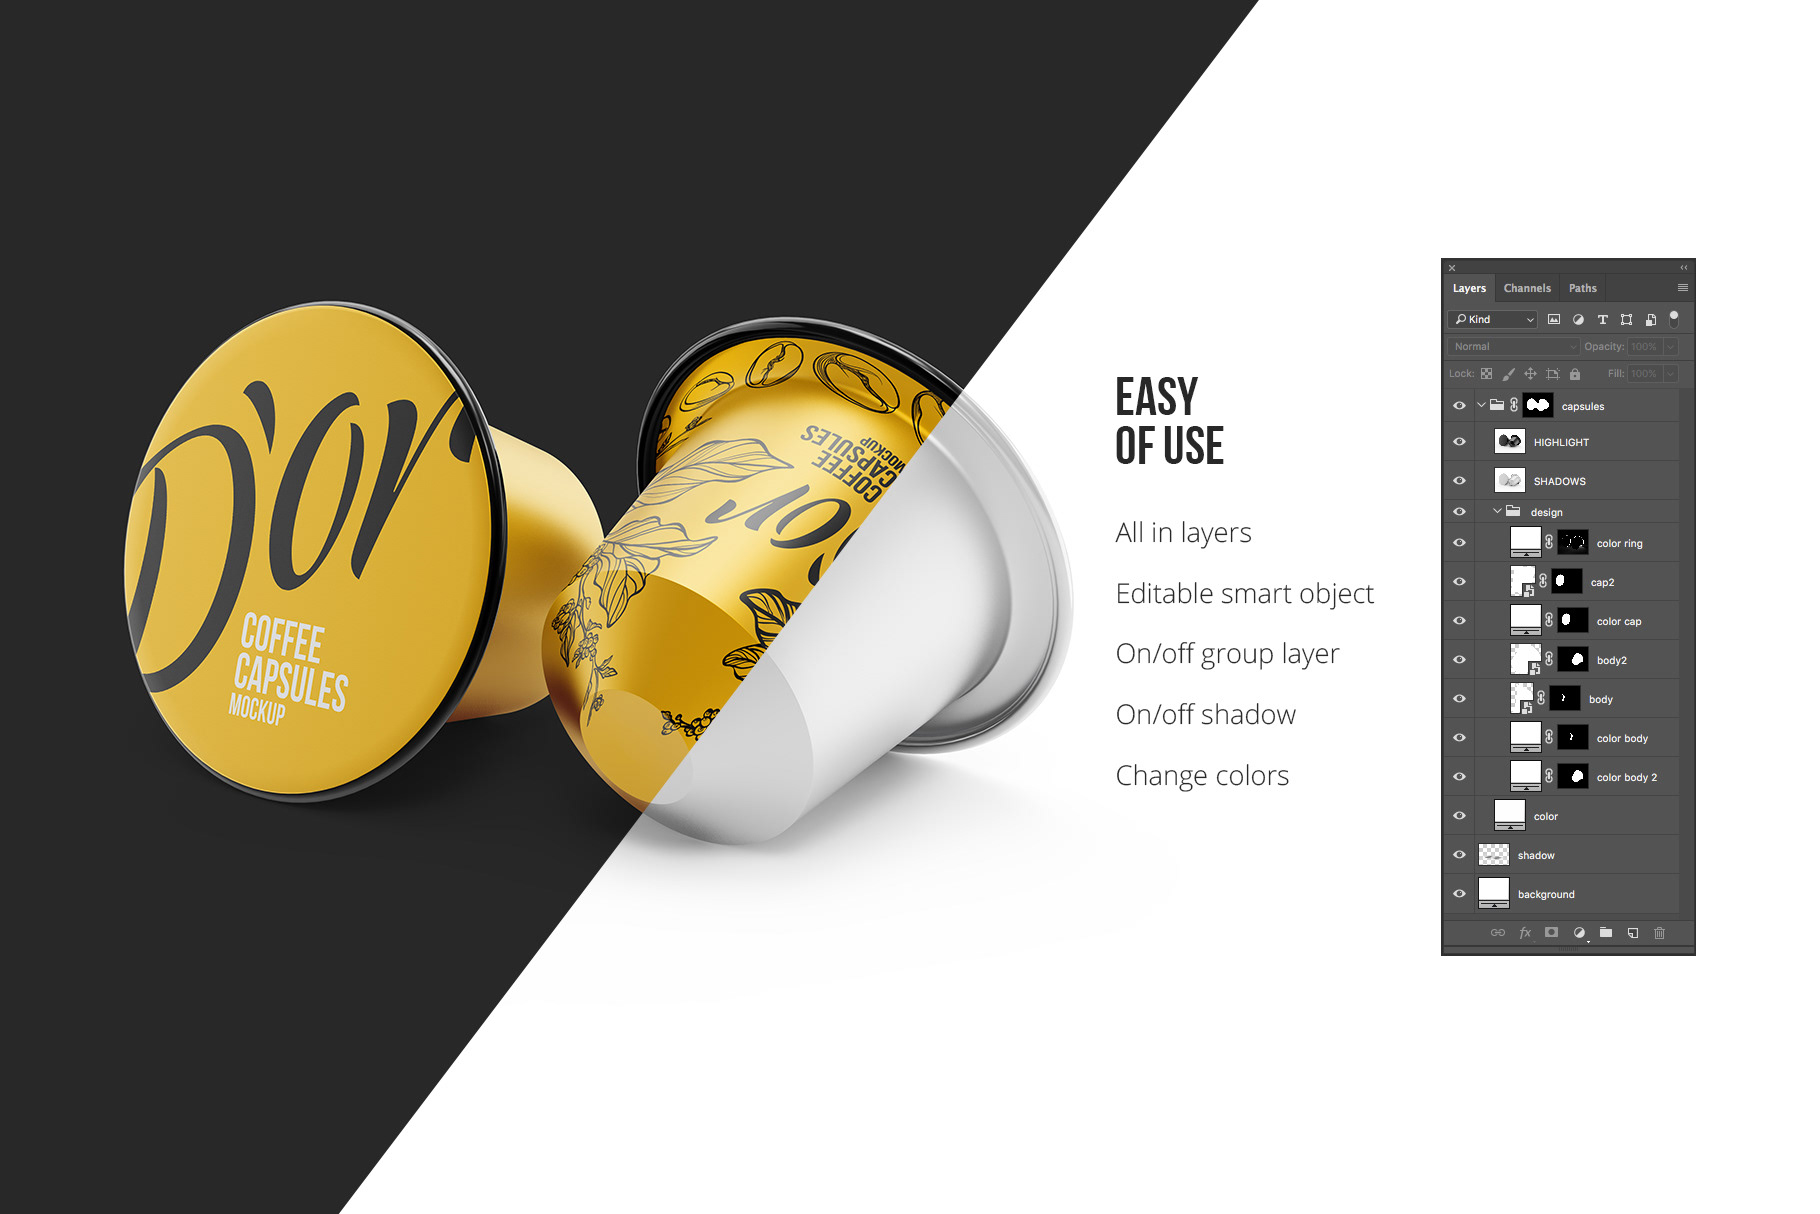 Download Exclusive Product Mockups - Coffee Capsules Pack. 4 psd